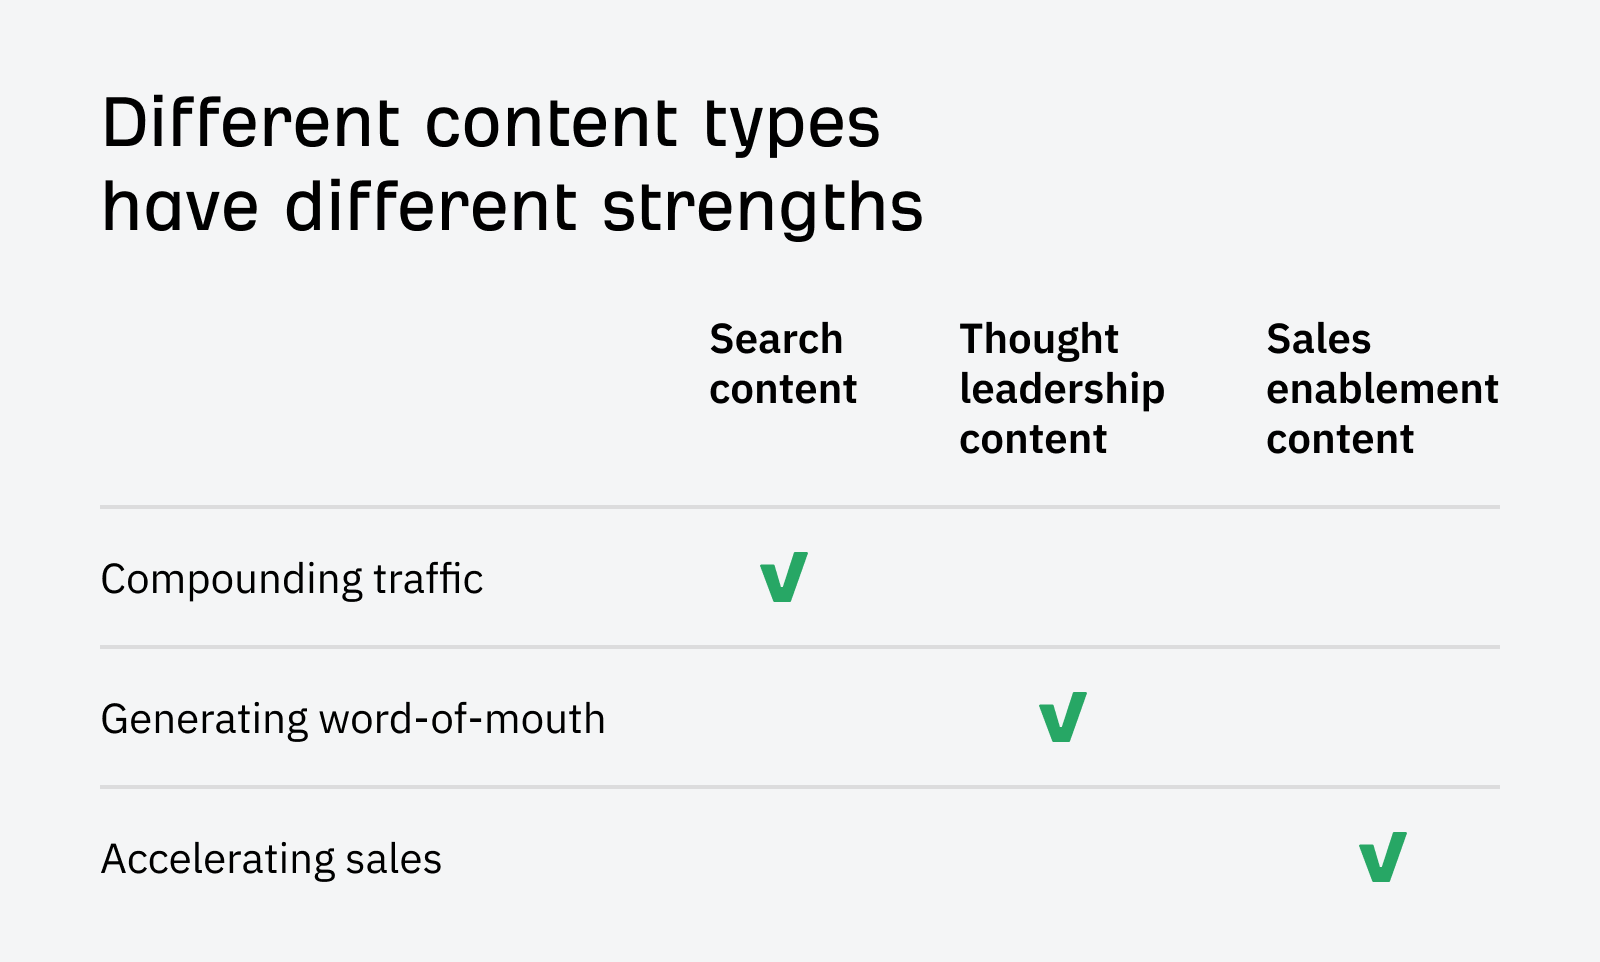 The strengths and weaknesses of different content types